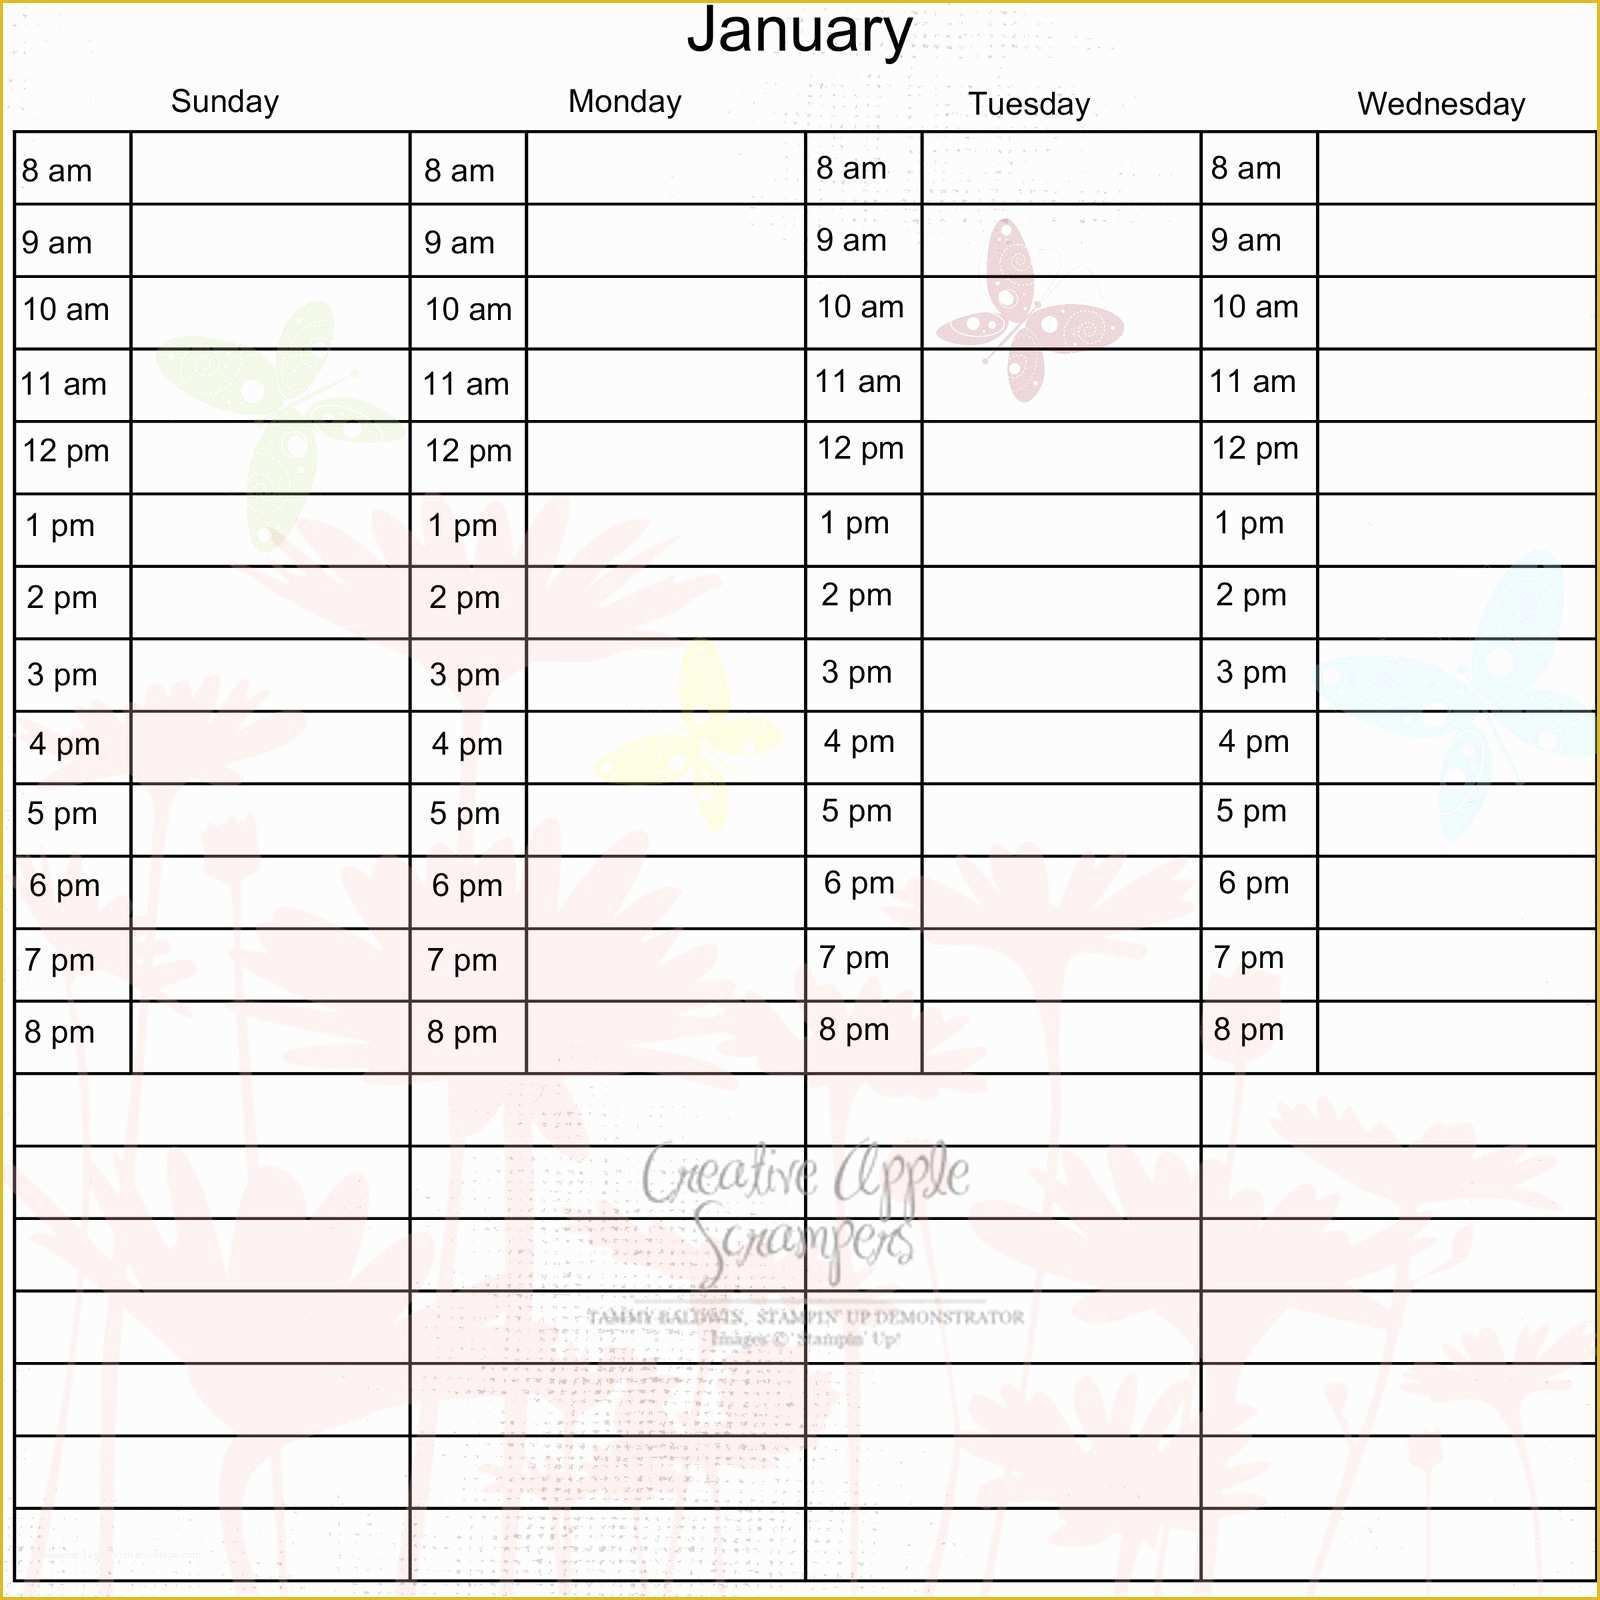 Appointment Book Template Free Printable Of Creative Apple Scrampers Appointment Book Page